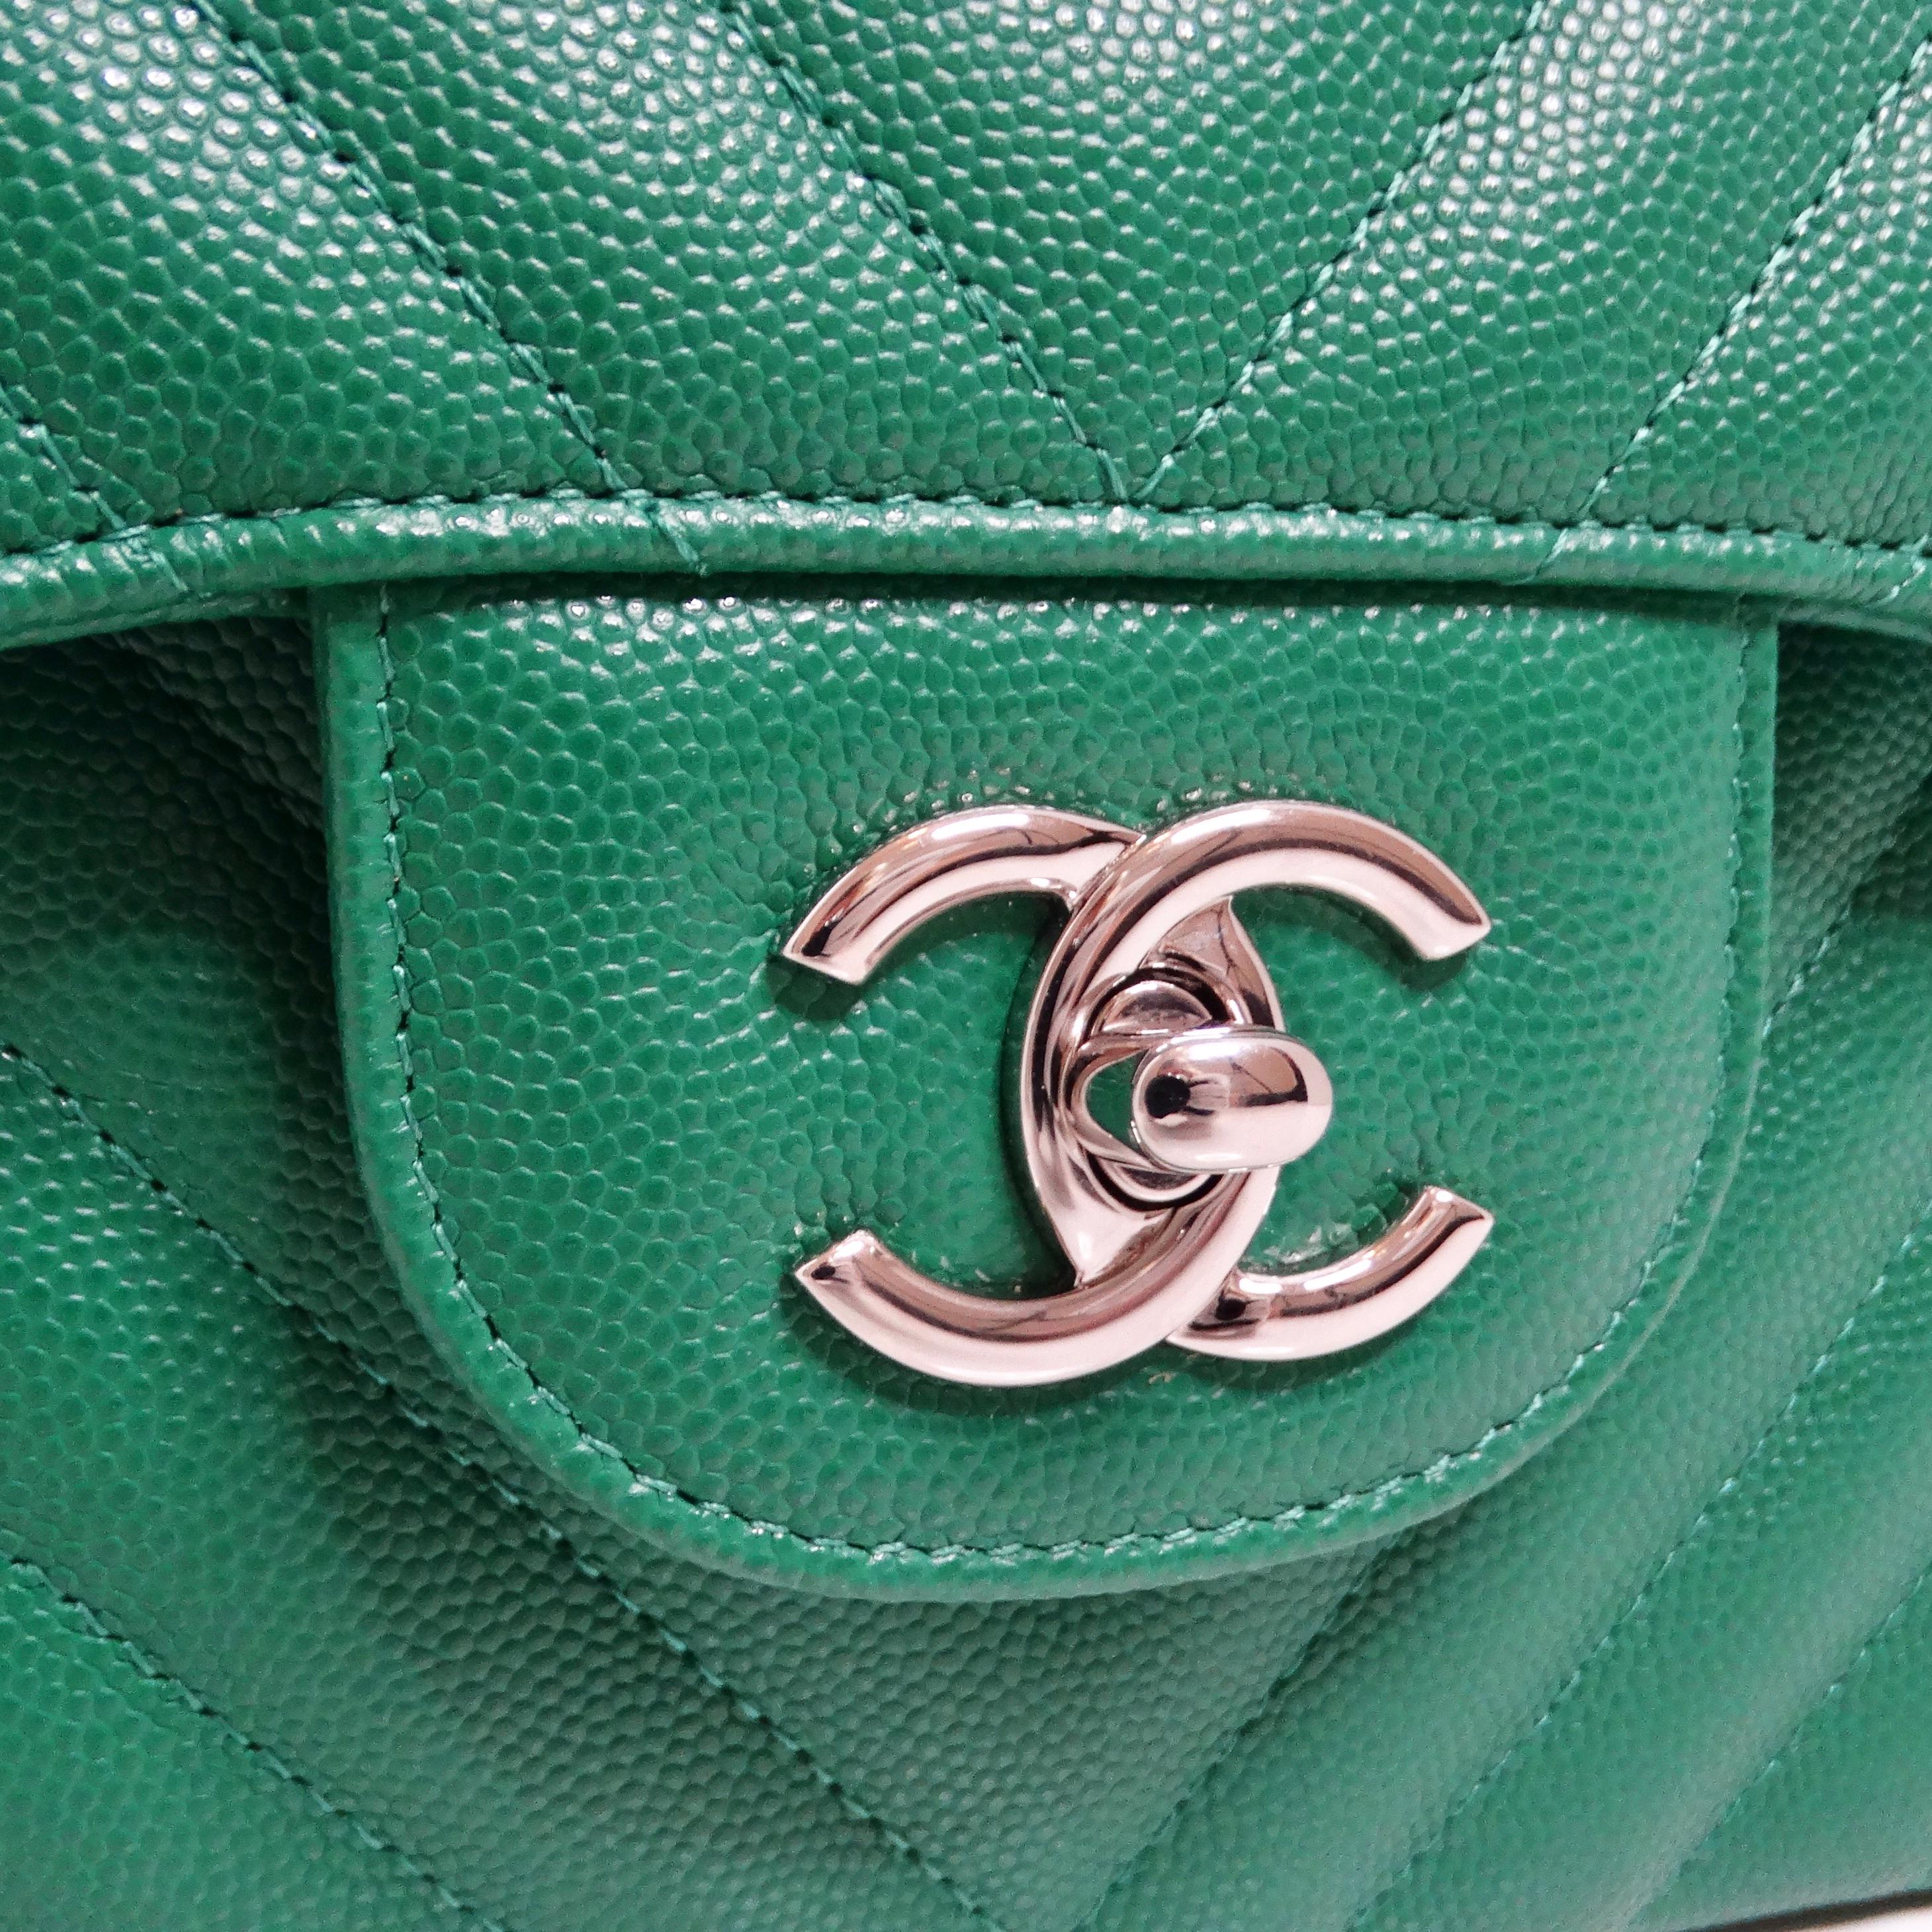 The Chanel 2017 Caviar Chevron Quilted Jumbo Flap Bag in dark green is a luxurious and timeless piece that embodies classic Chanel style with a modern twist. Crafted from caviar leather, this jumbo-sized shoulder bag features a distinctive chevron